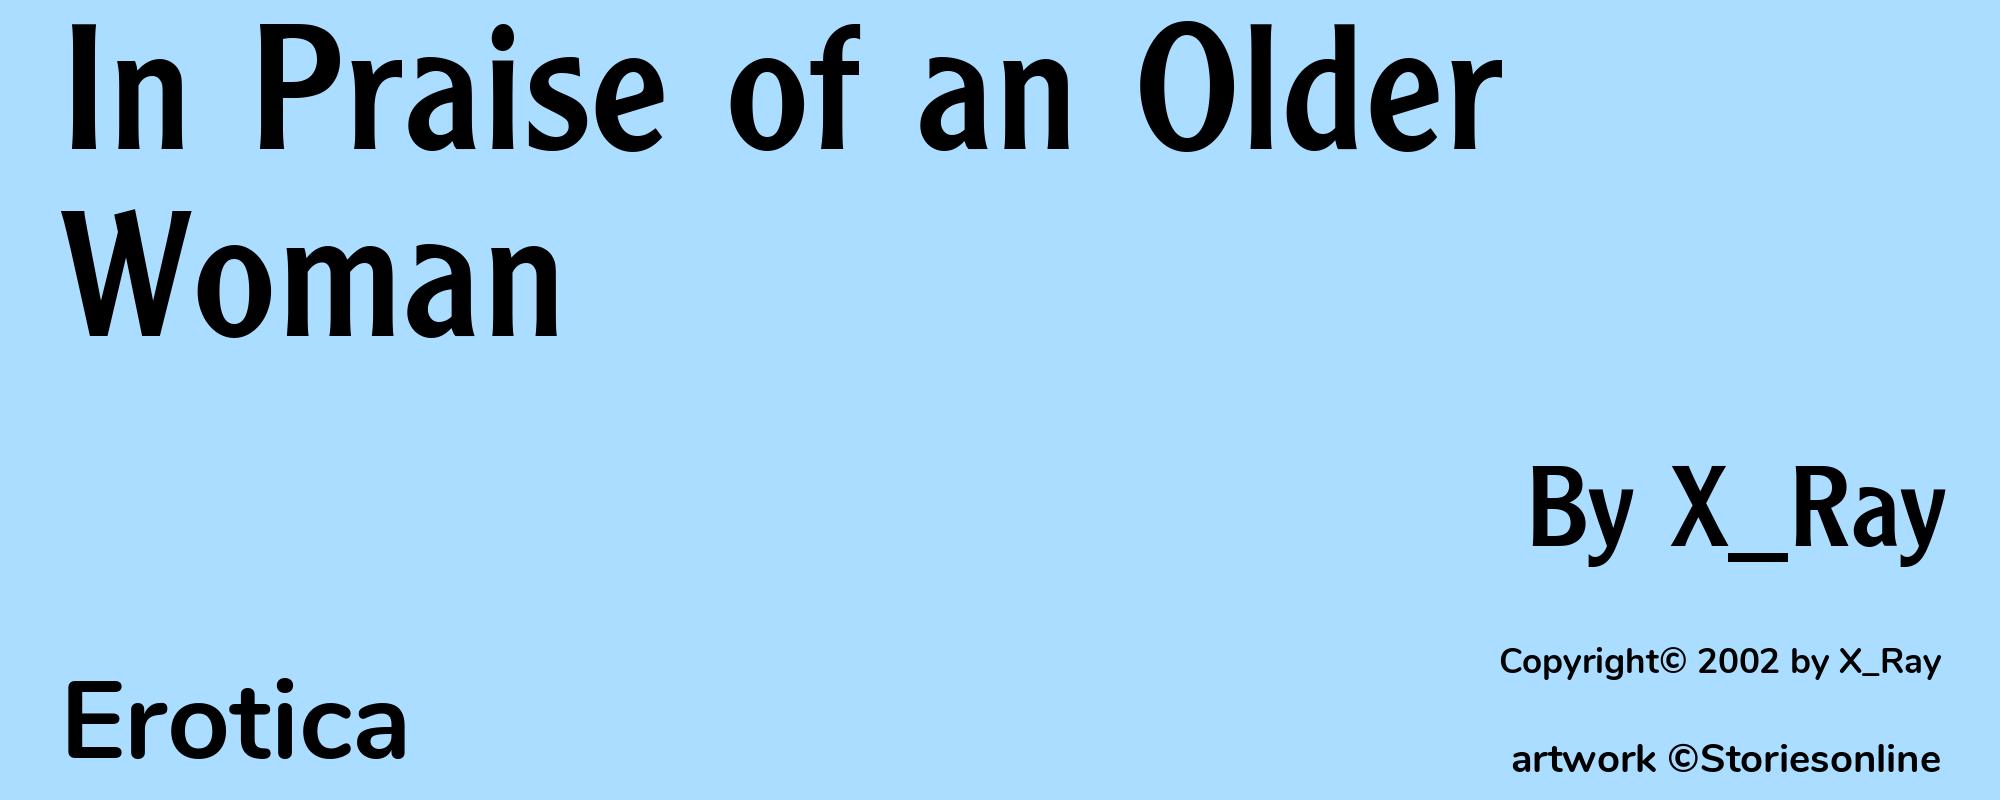 In Praise of an Older Woman - Cover